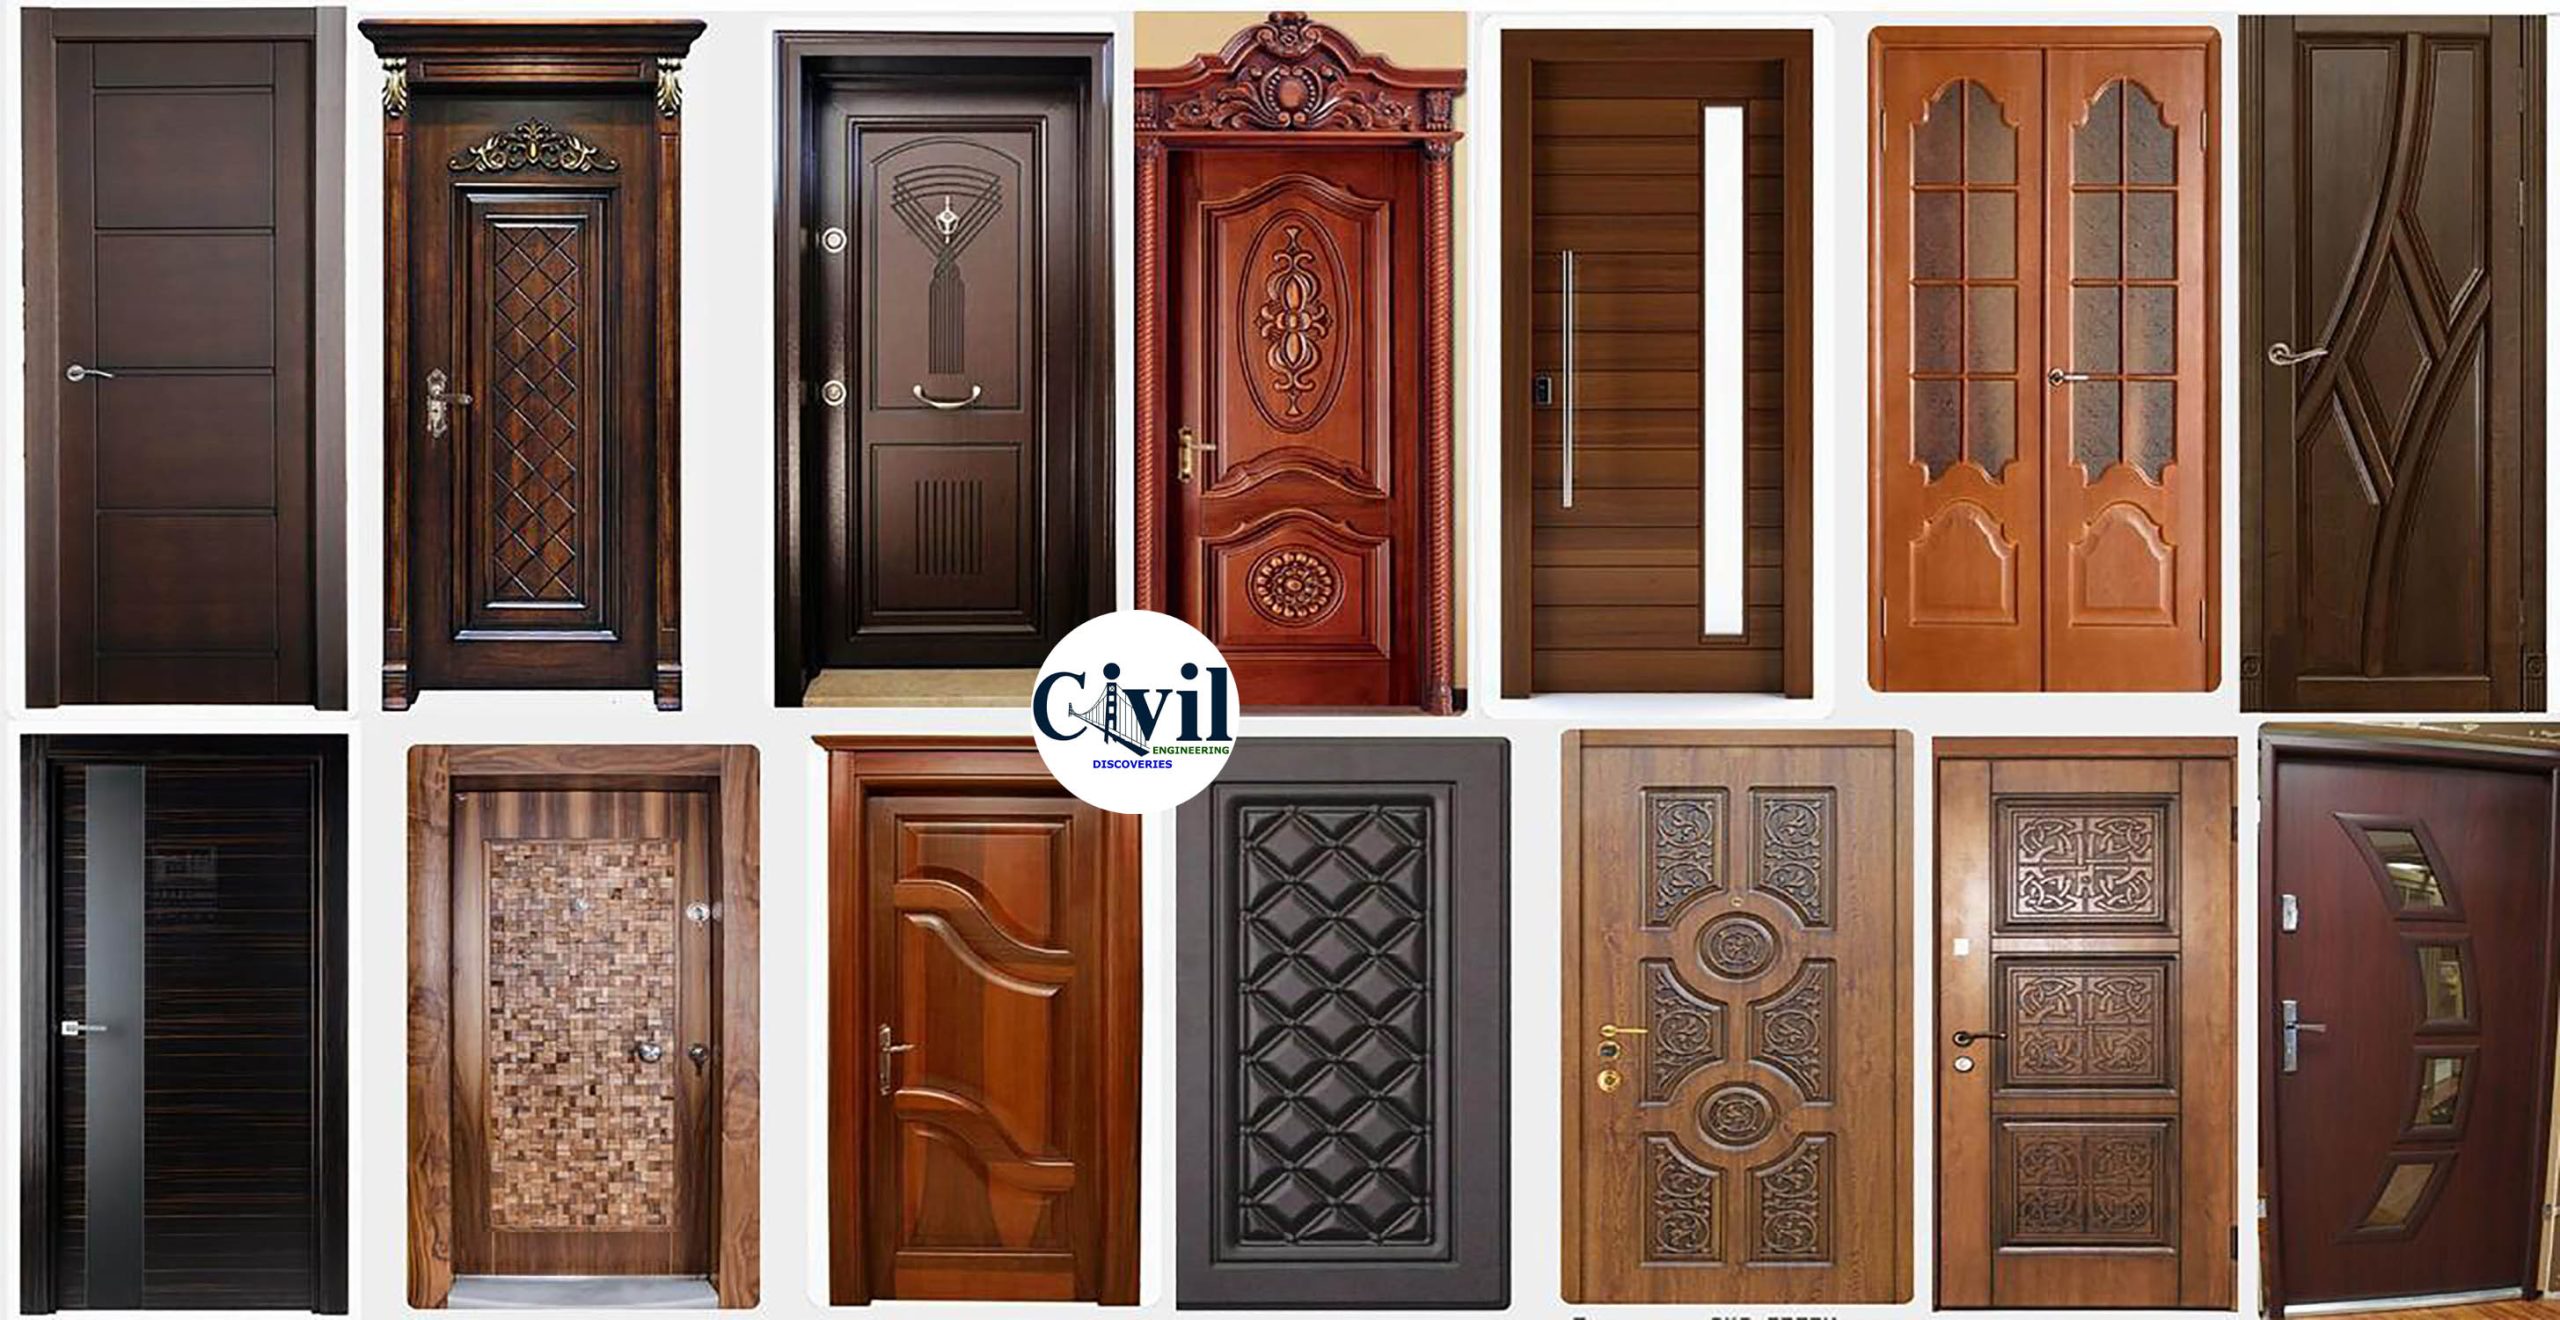 Wooden Doors Designs Types And More Building Our House | designinte.com